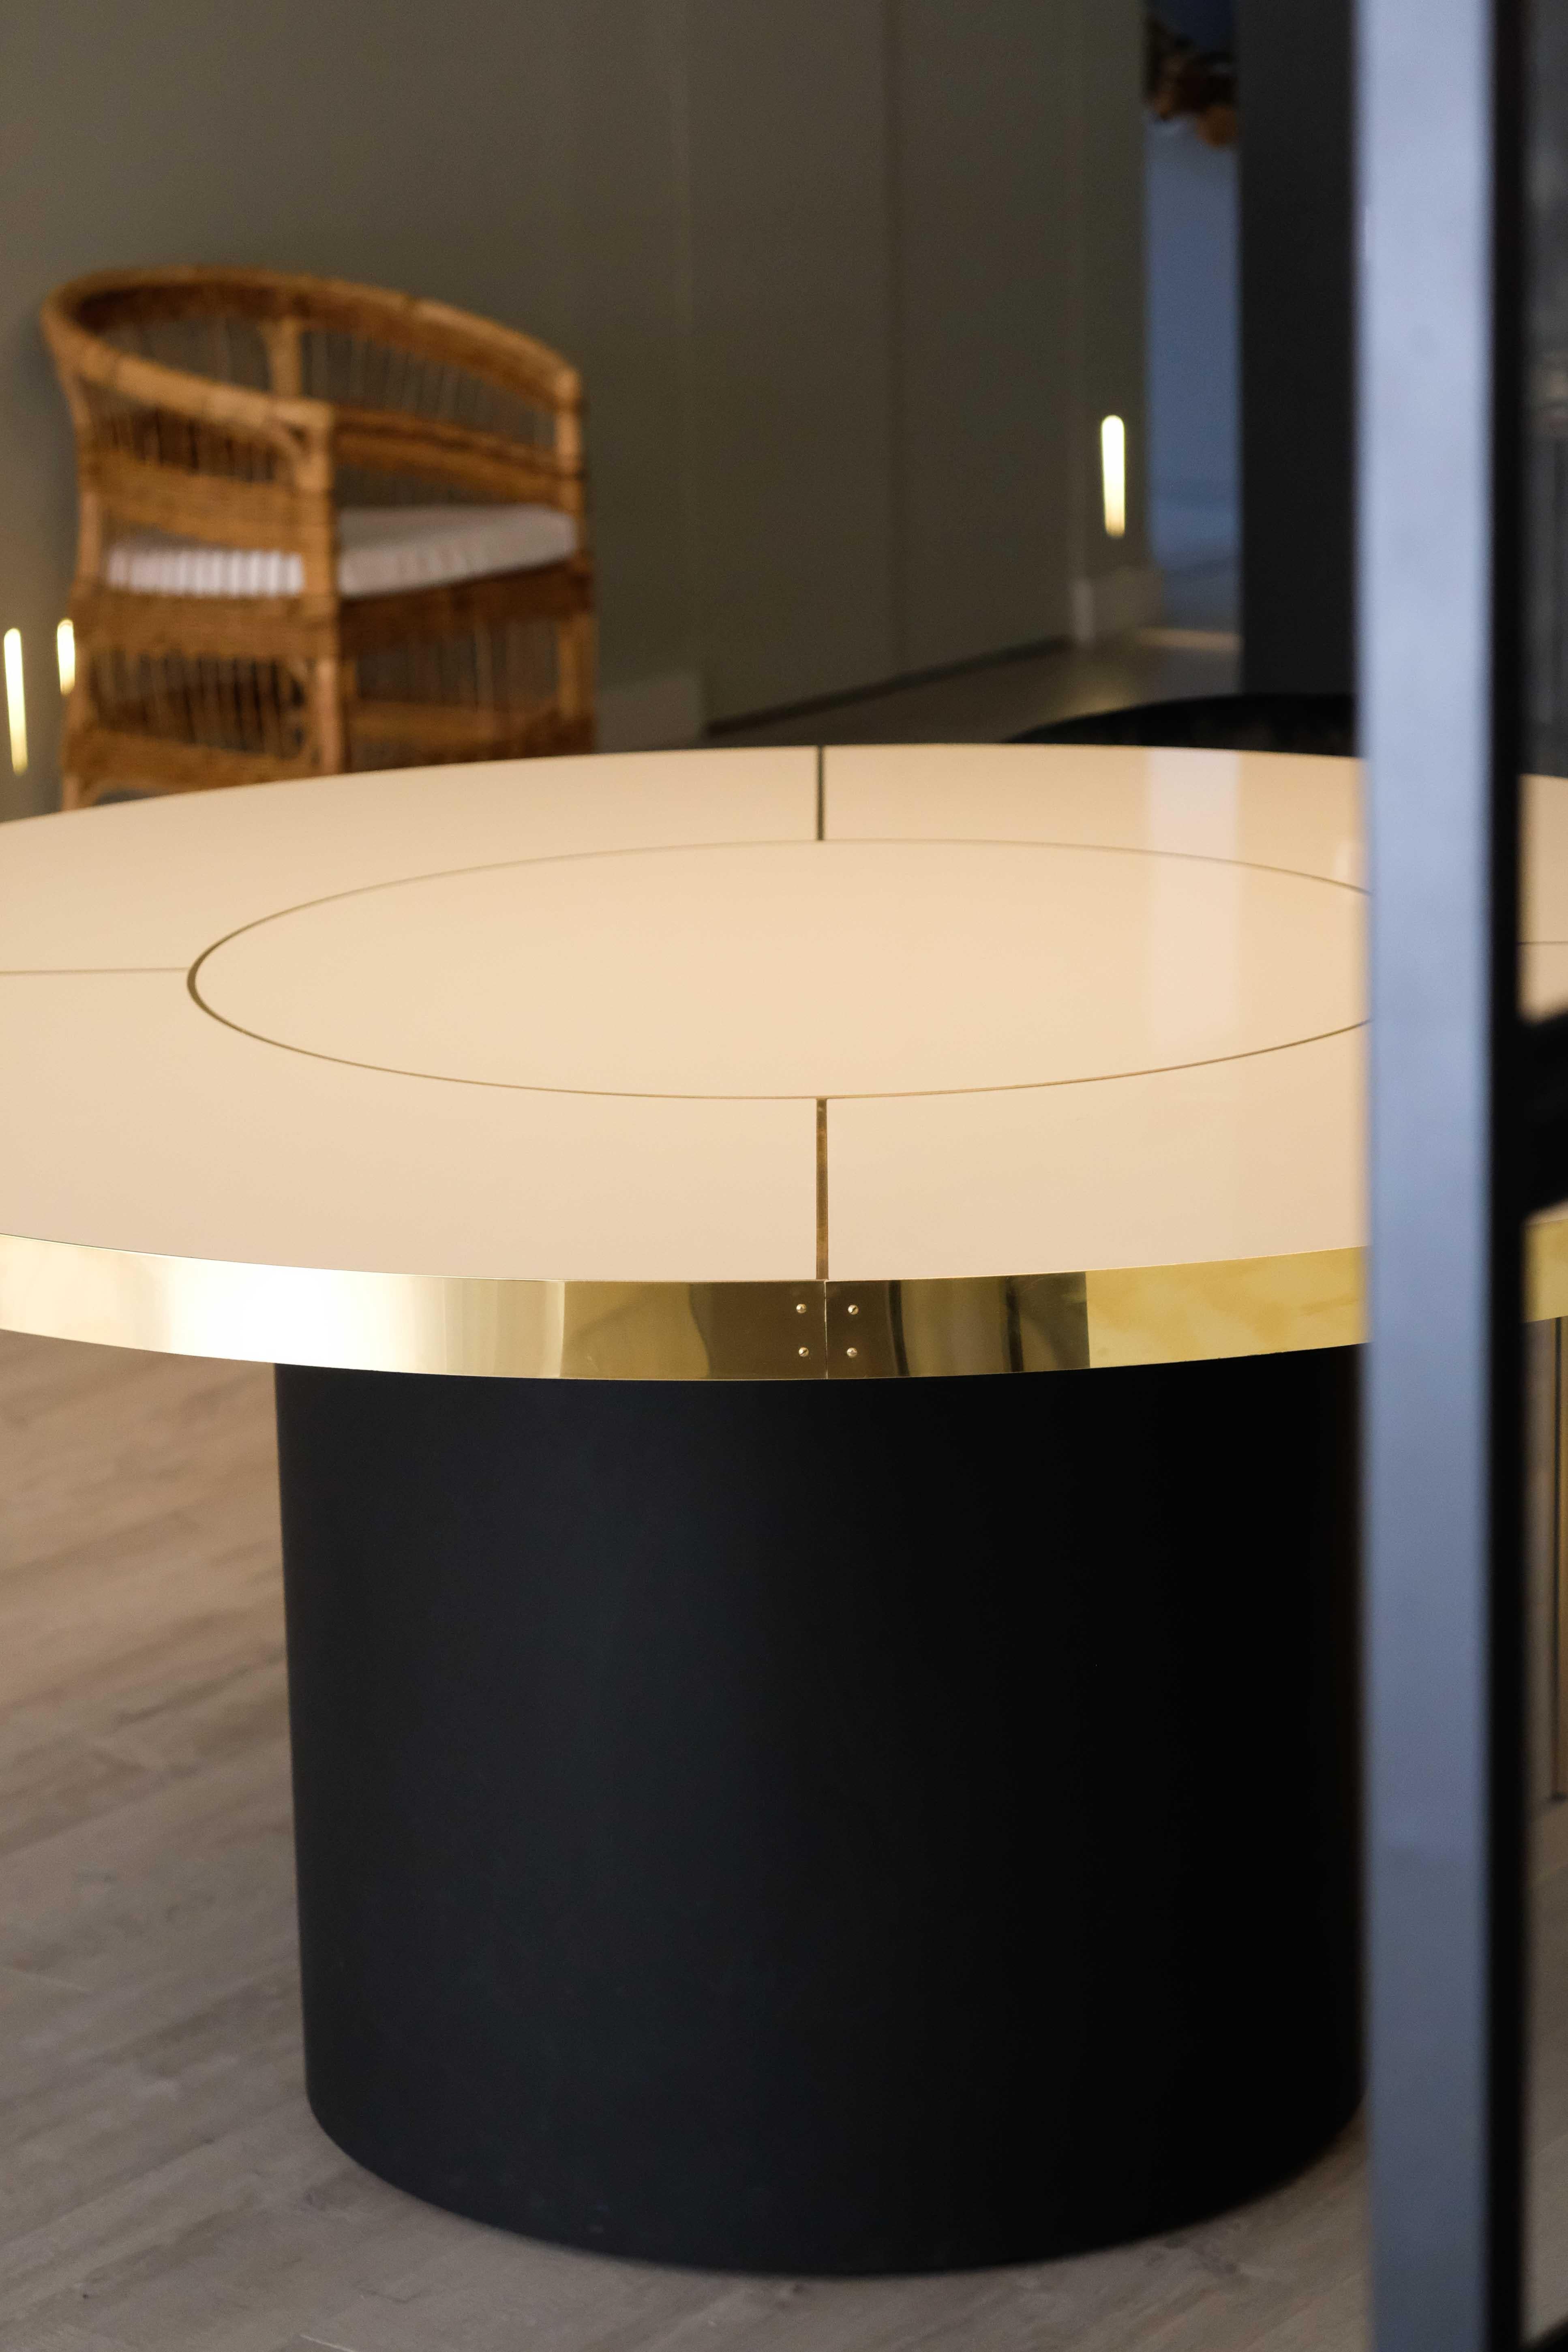 Antique White Round Table High Gloss Laminated Brass Marquetry XL In New Condition For Sale In Alcoy, Alicante